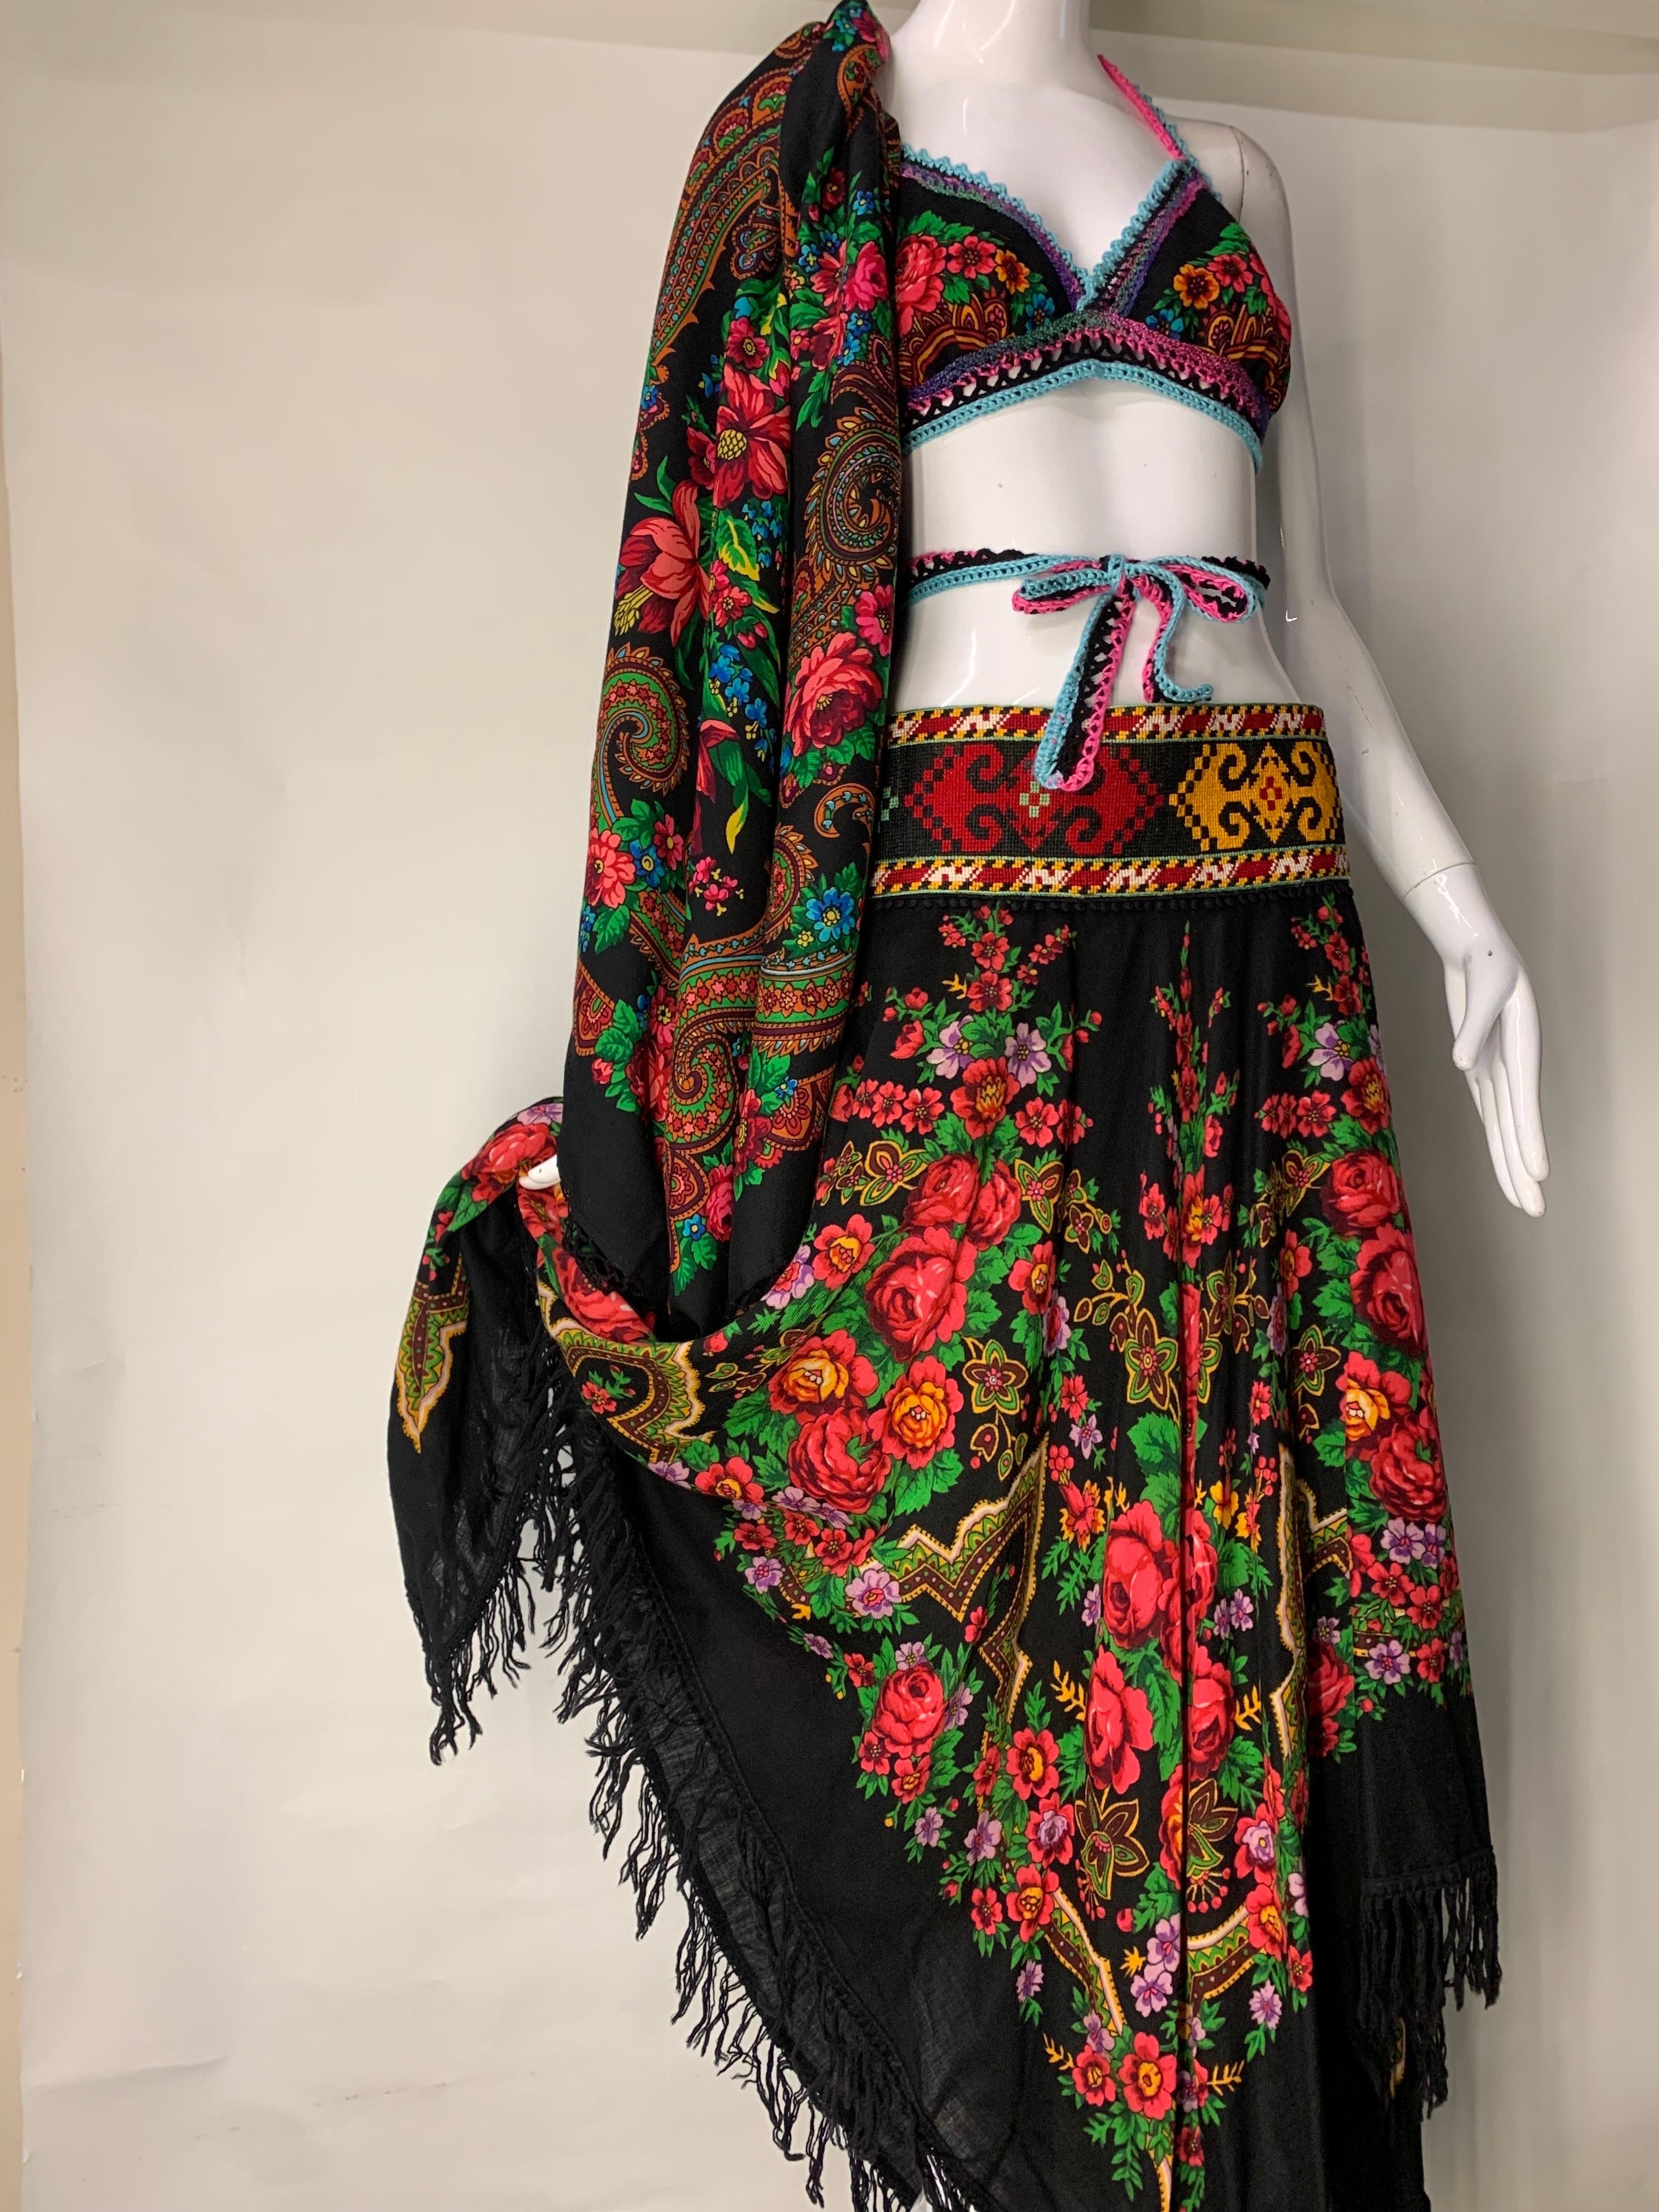 Torso Creations Floral Wool Challis 3-Piece Ensemble - Bra Skirt and Shawl In Excellent Condition For Sale In Gresham, OR